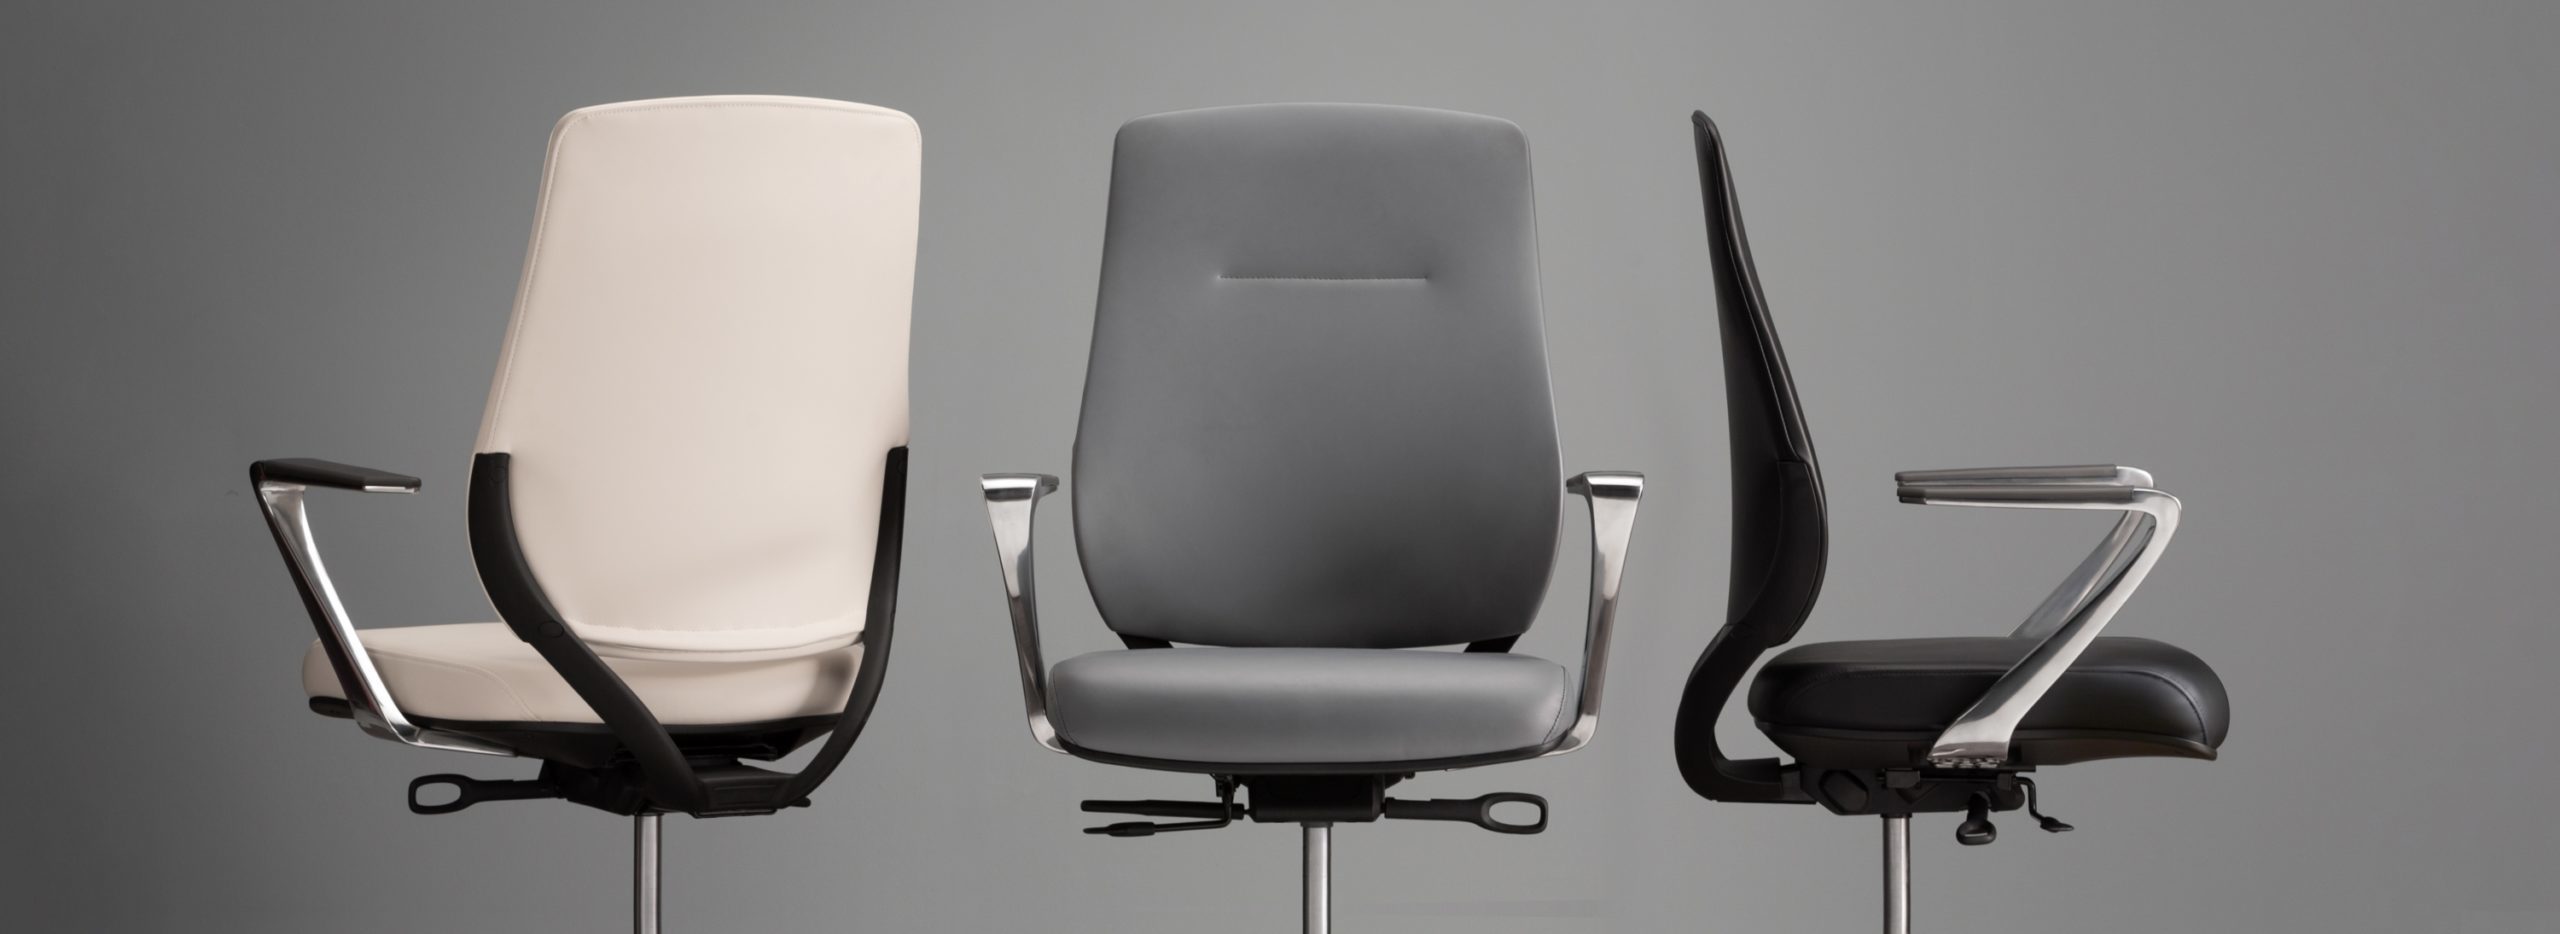 AIS Office Chairs against grey background